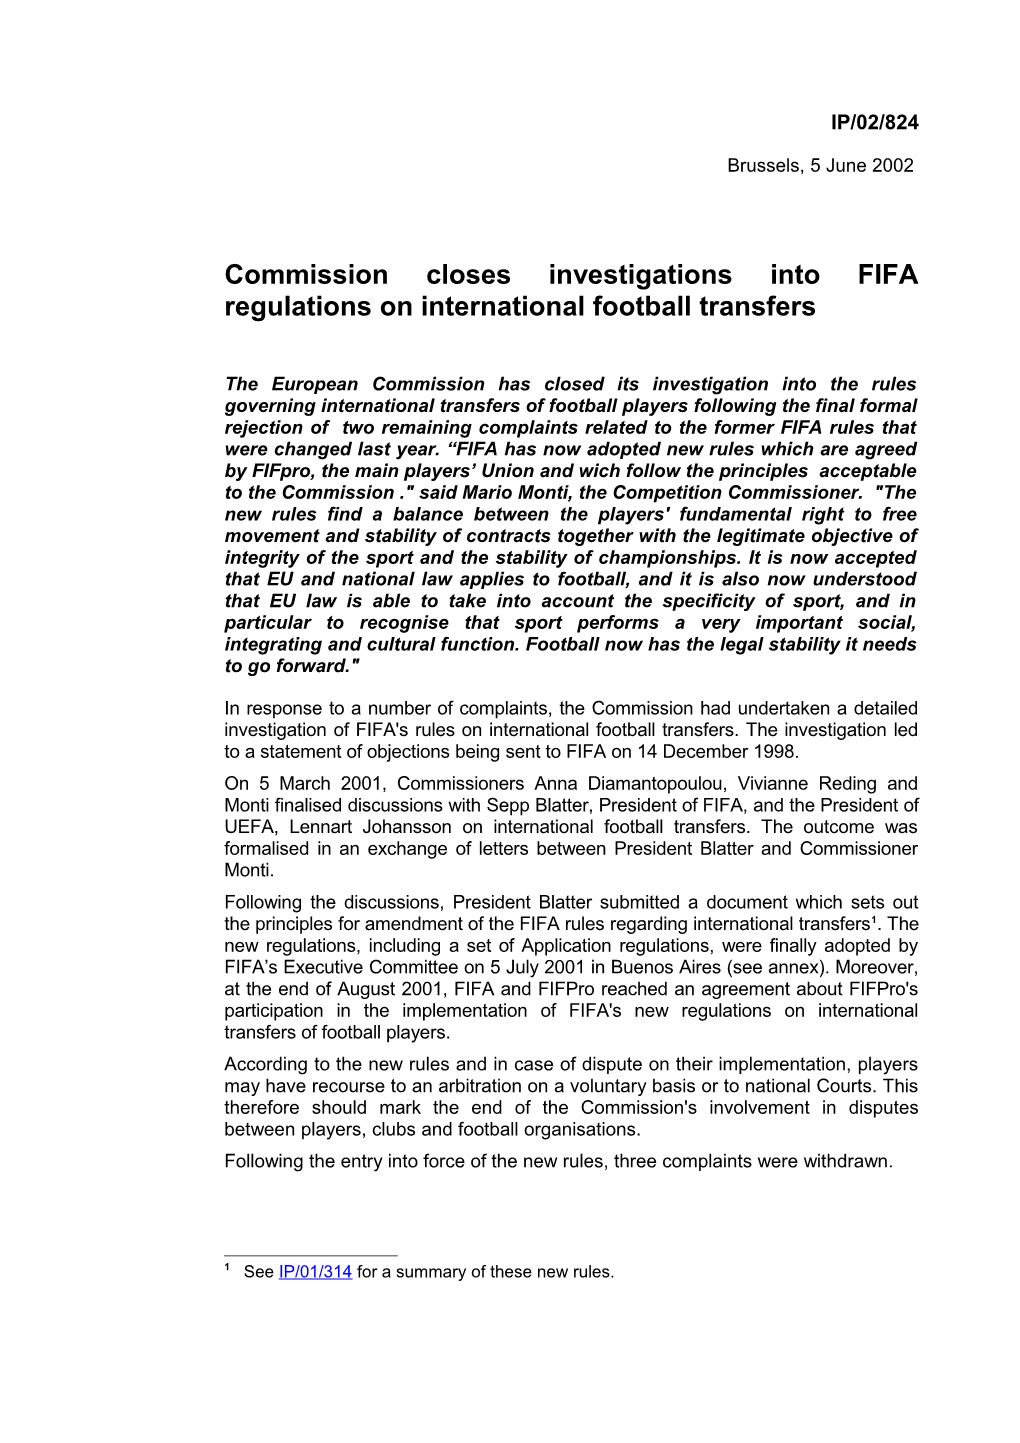 Commission Closes Investigations Into FIFA Regulations on International Football Transfers